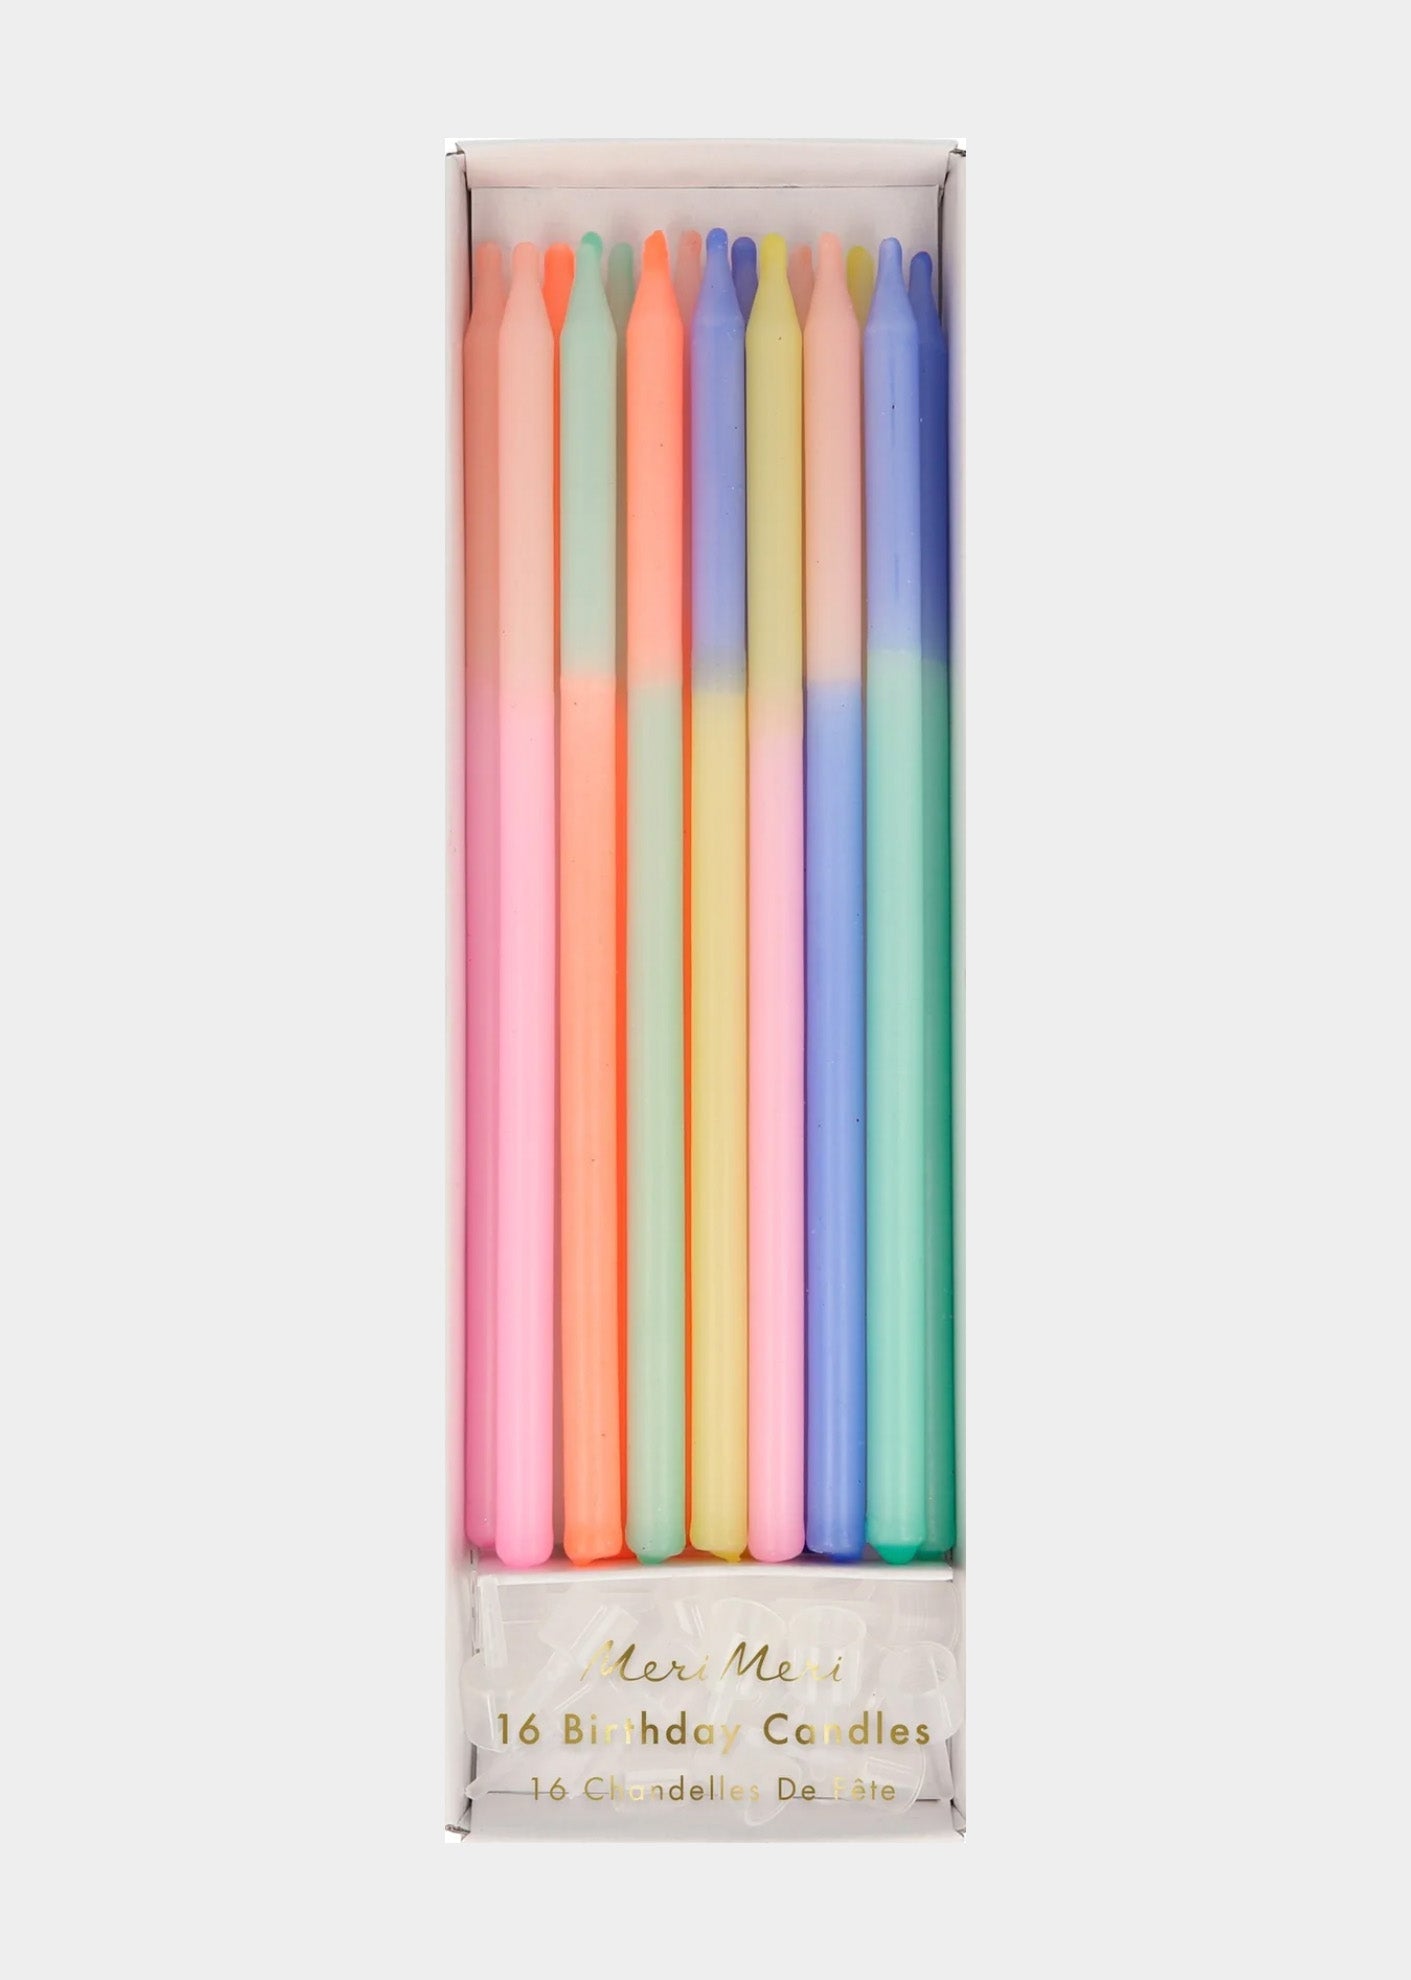 CANDLESMULTI